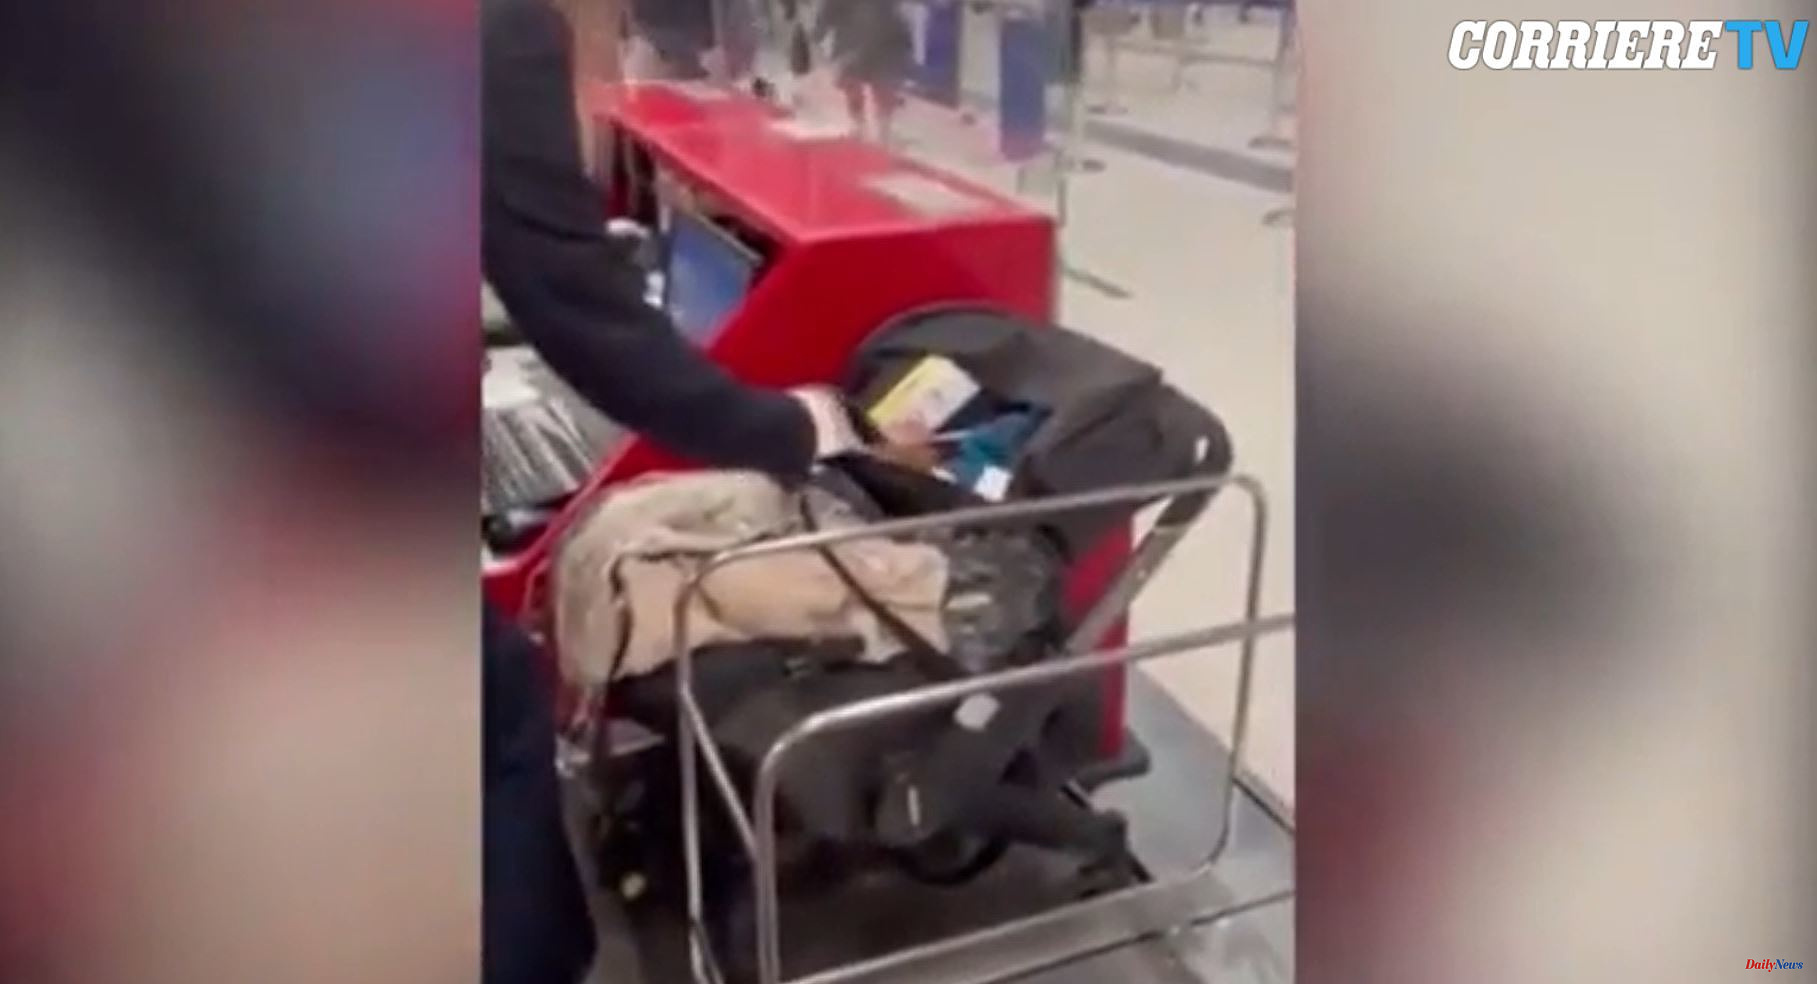 International A Belgian couple leaves their baby at the Tel Aviv airport check-in counter because they do not want to pay for the child's ticket